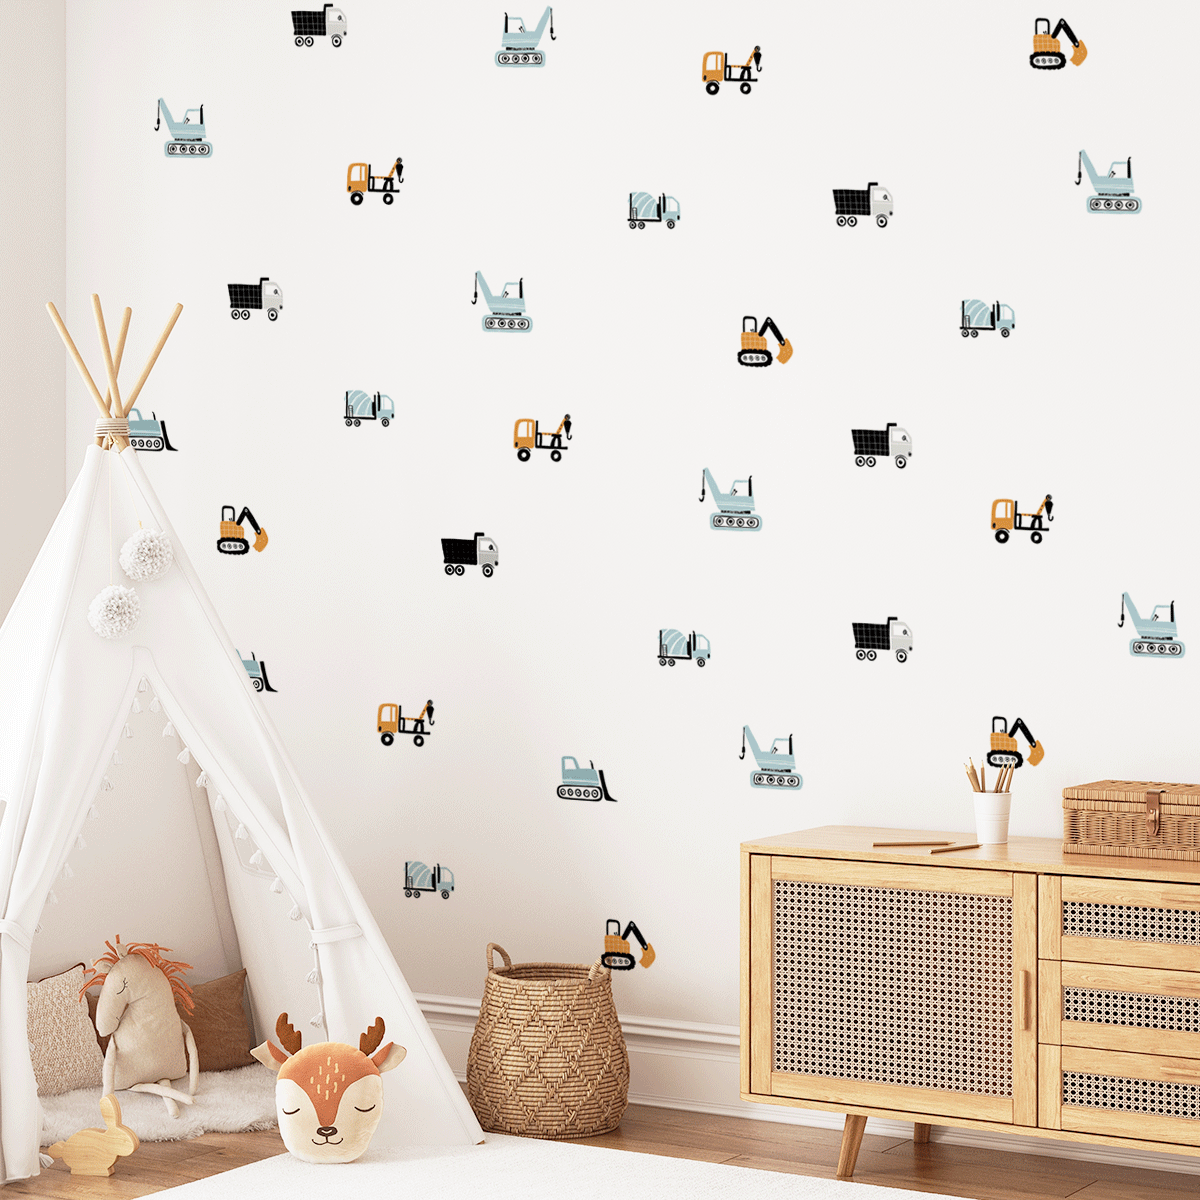 Car wall stickers - Construction is king